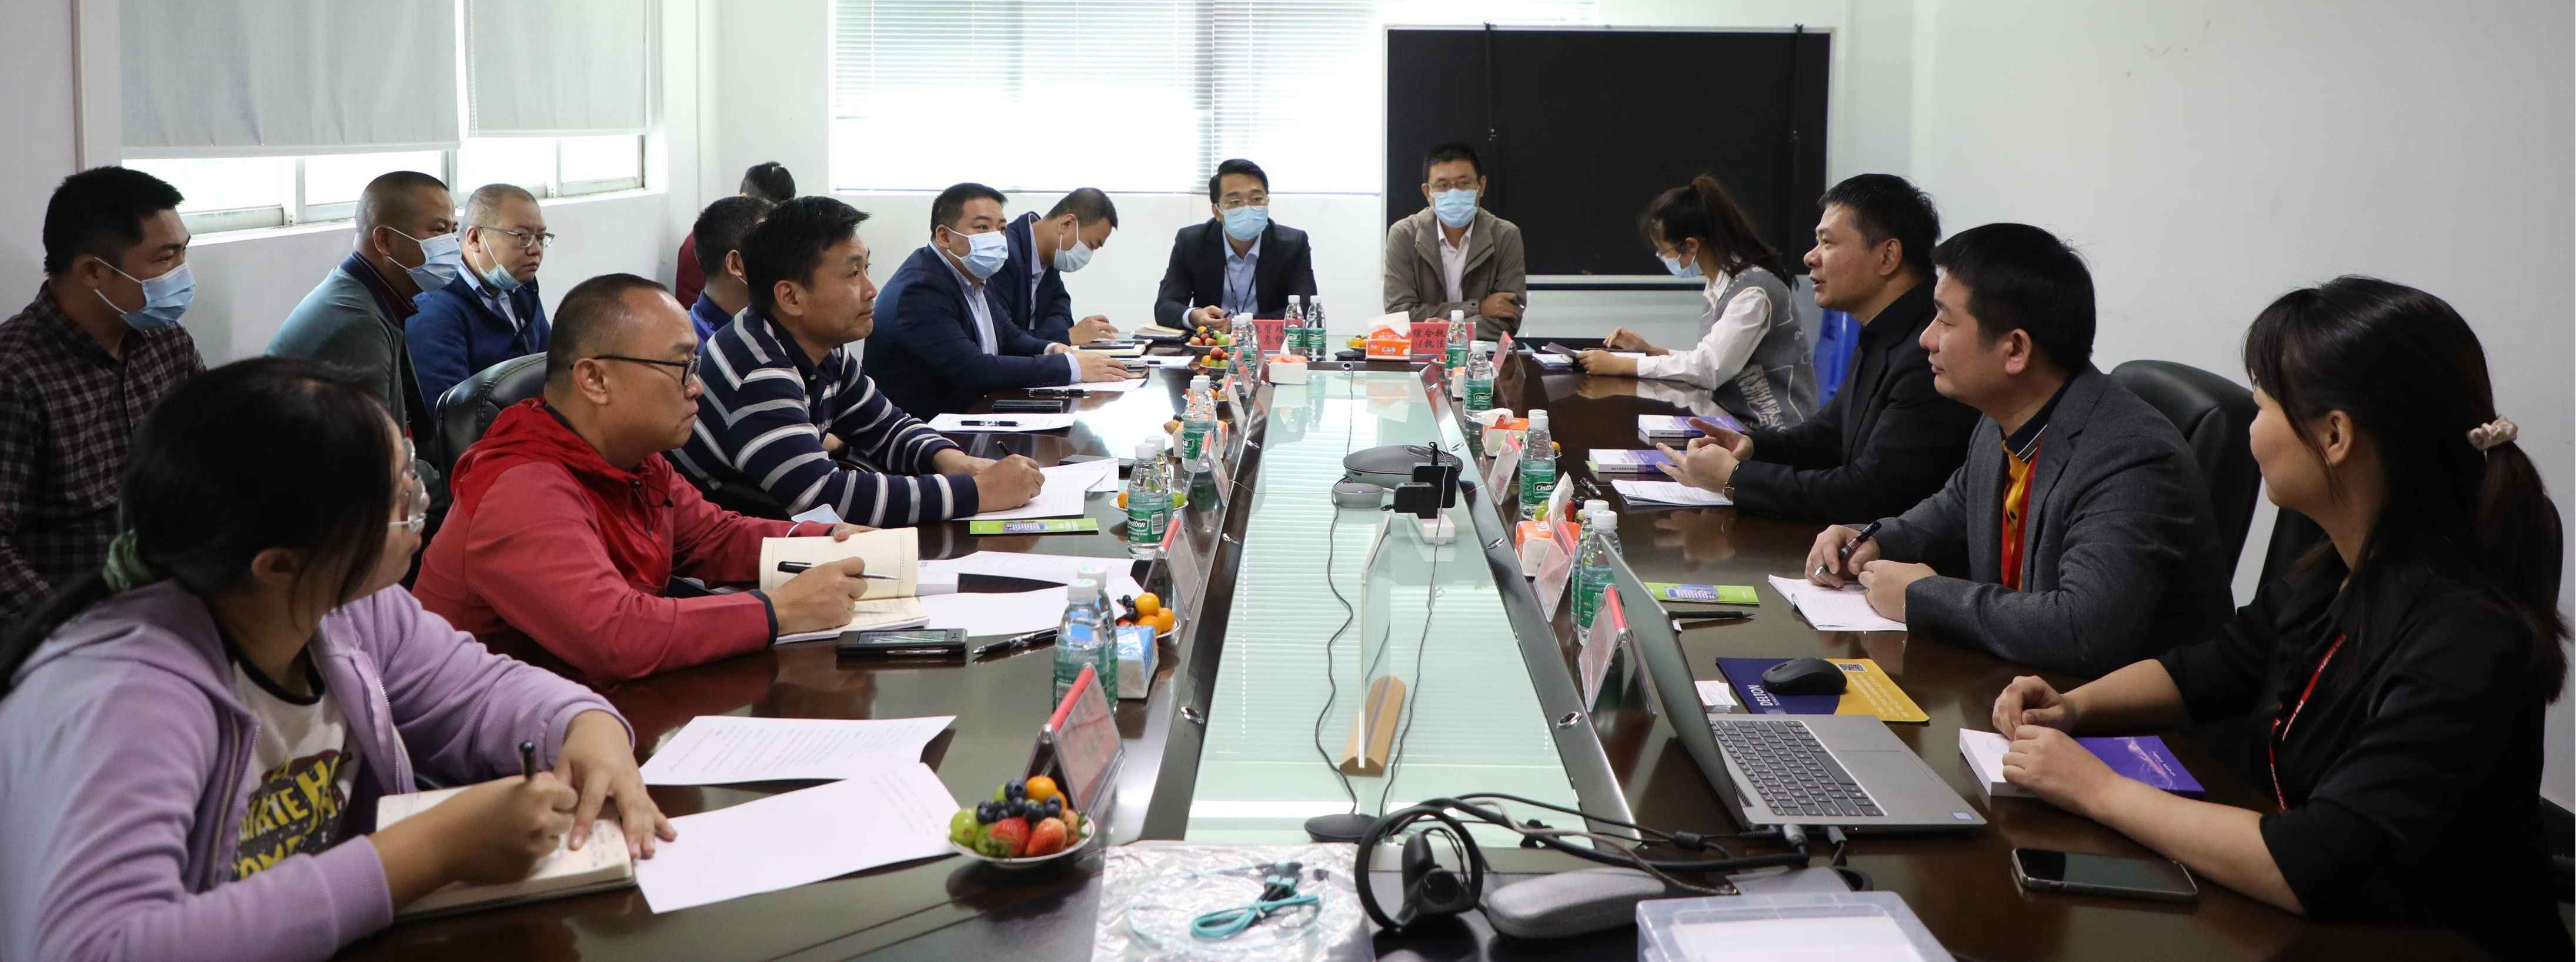 Director Gu of Guangming Street and his party visited our company for research and guidance